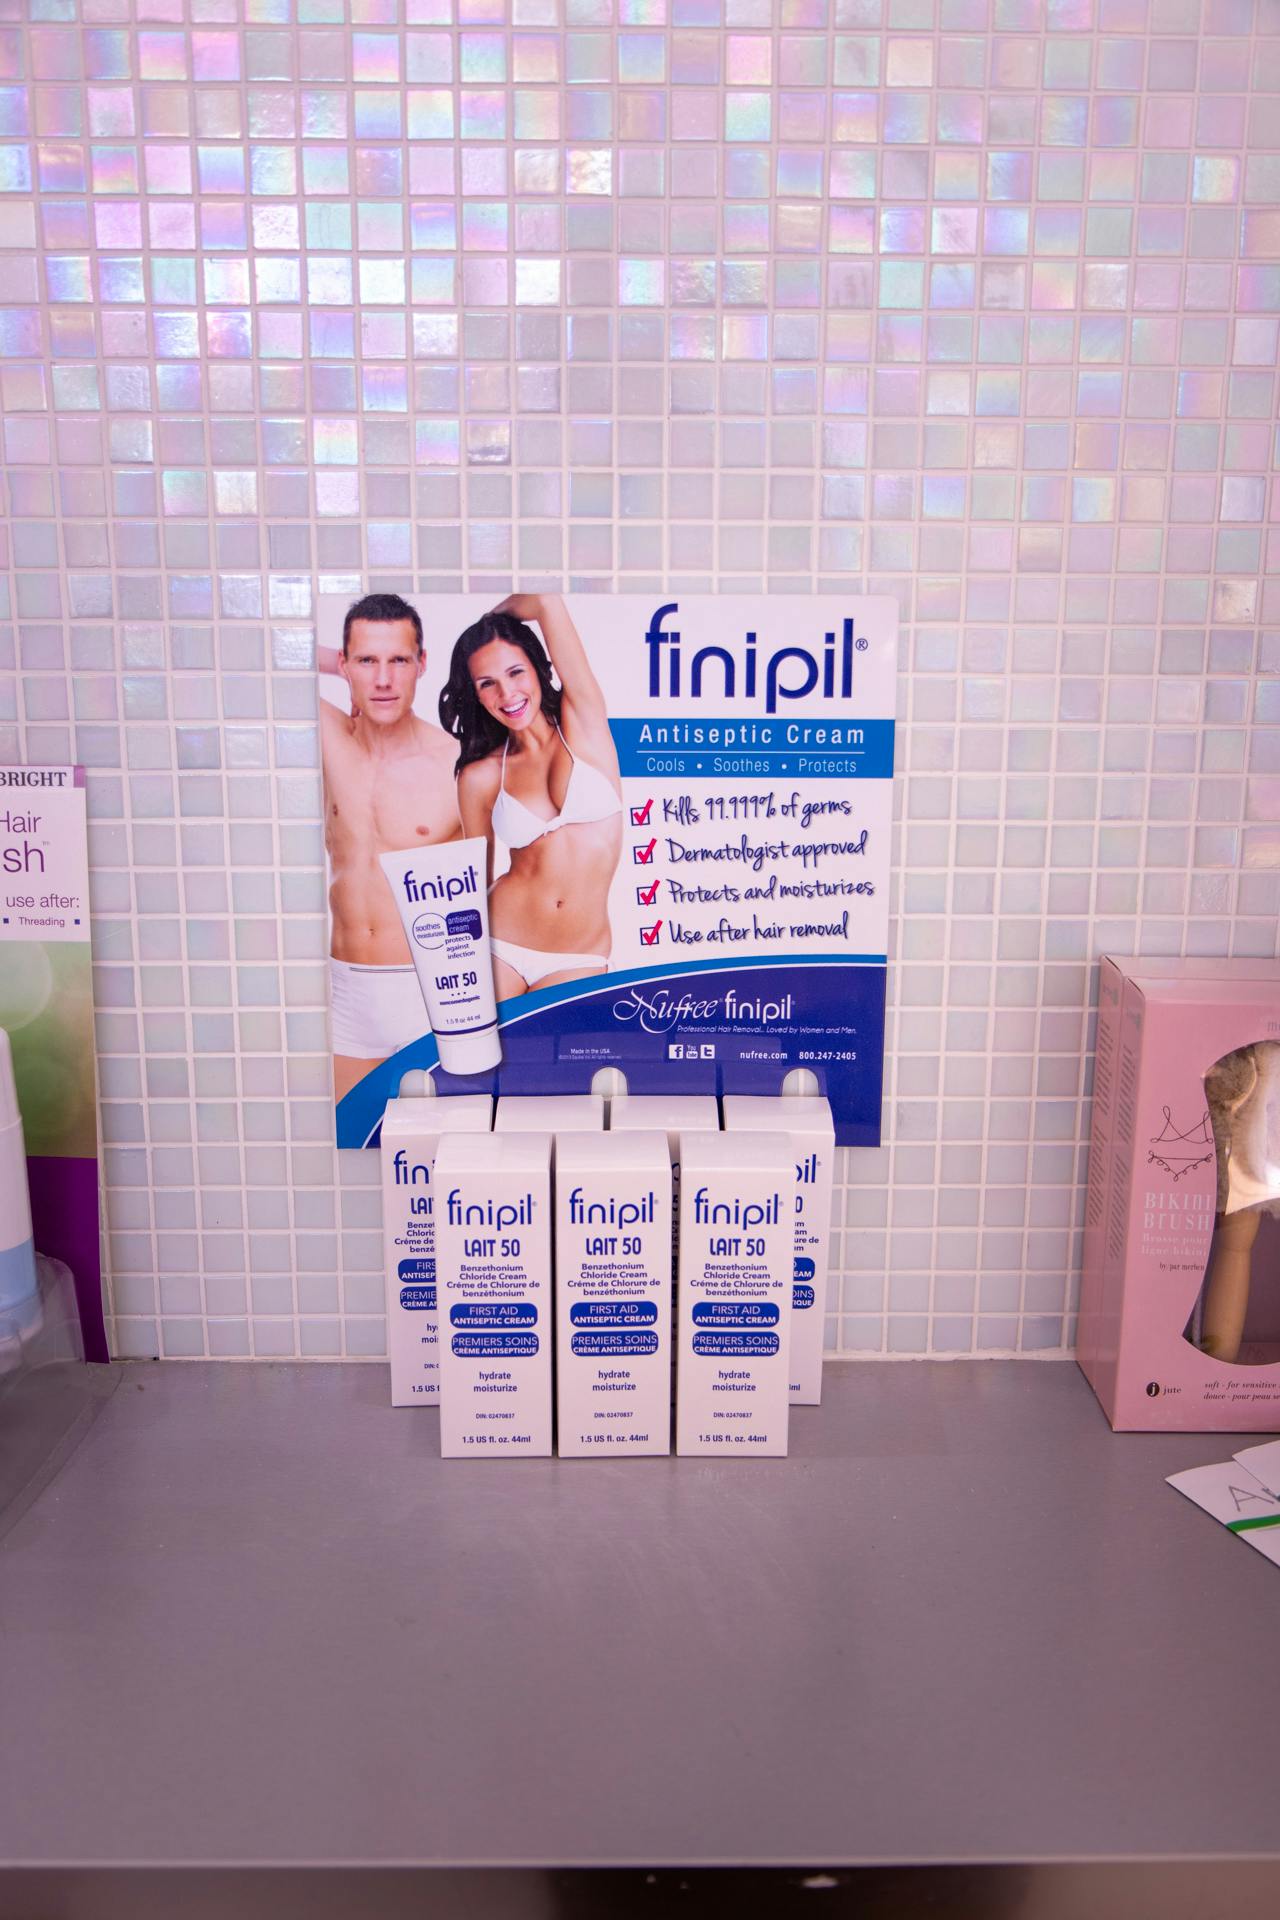 Finipil antiseptic cream on the display counter